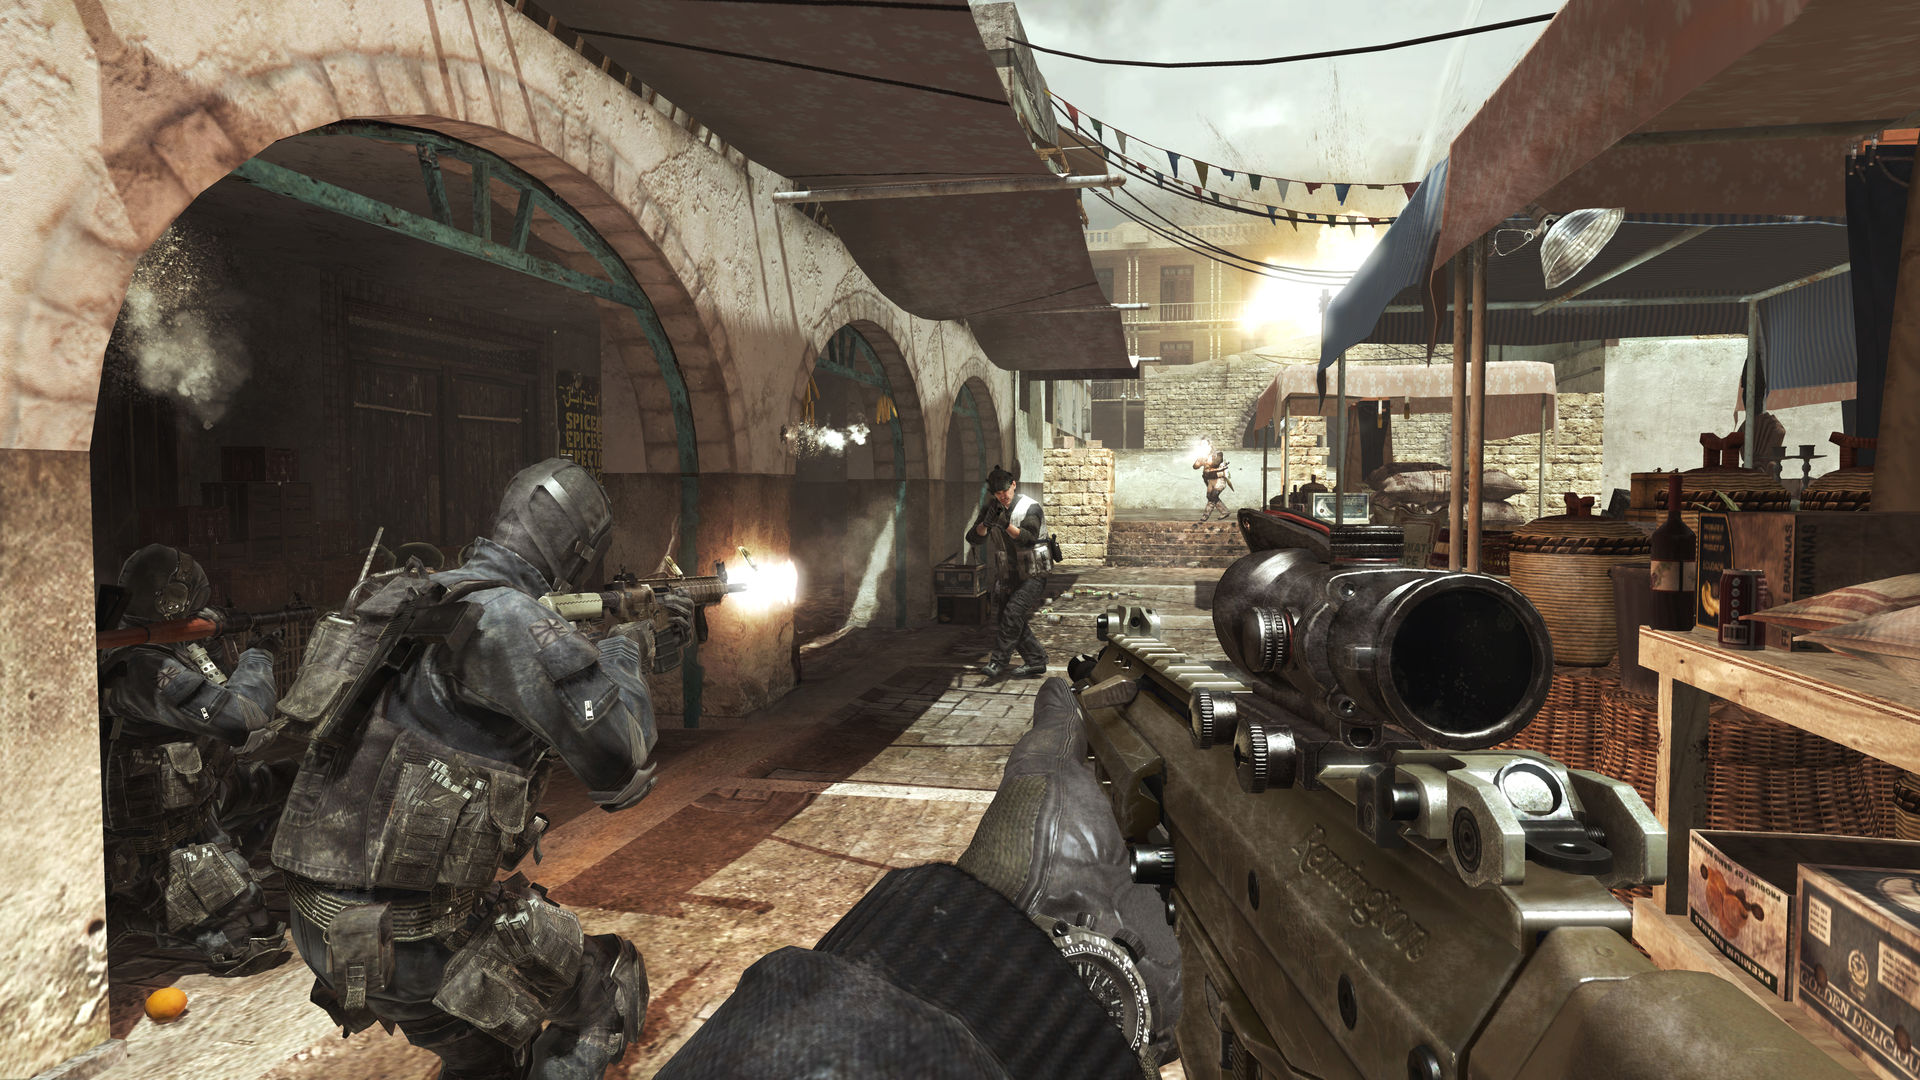 cod mw3 full game download pc free